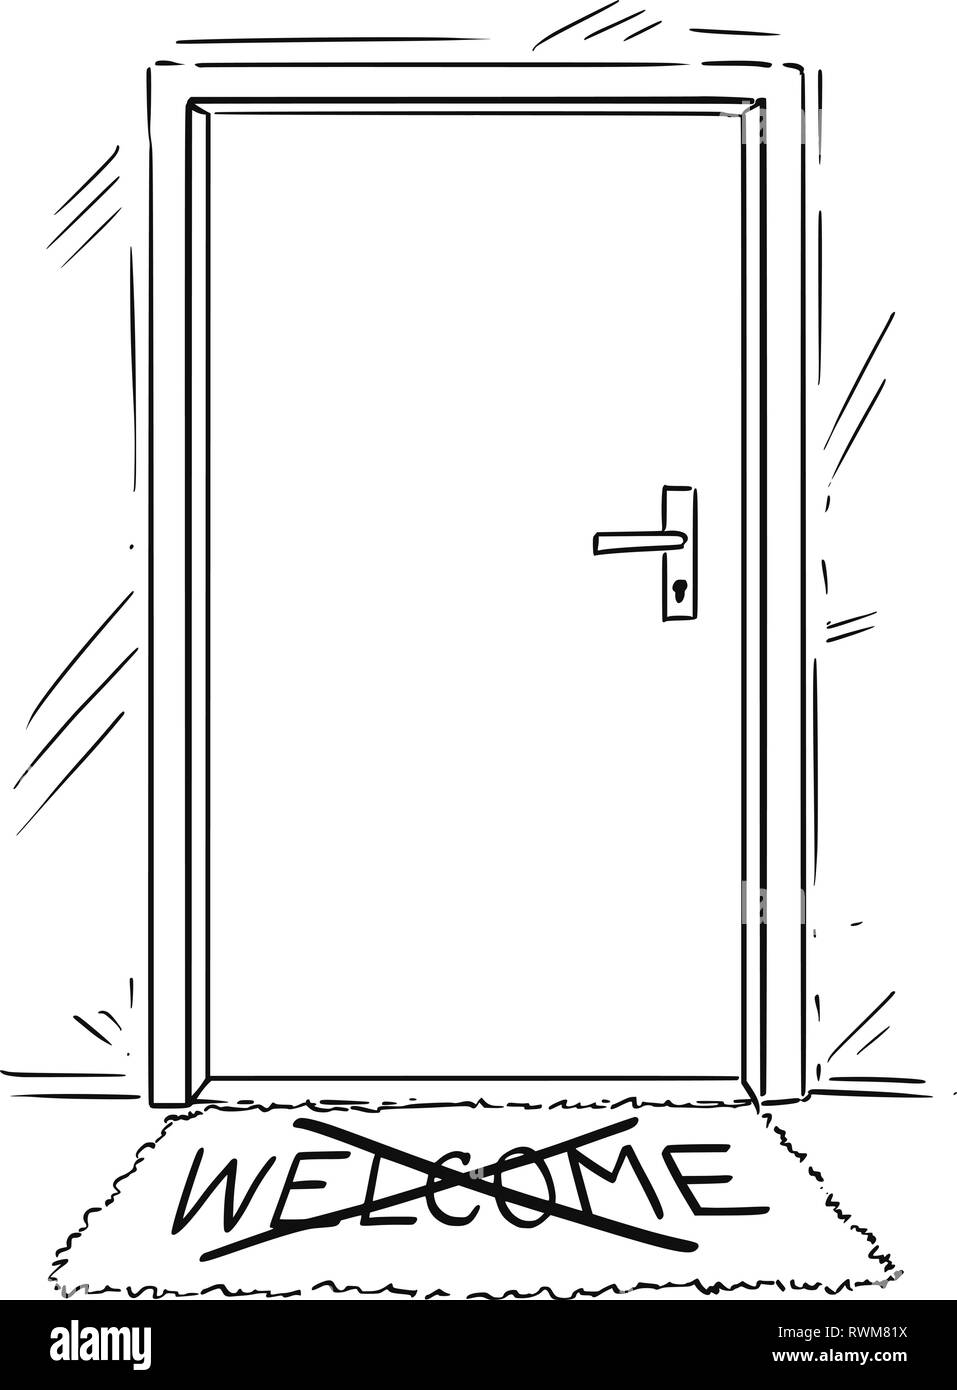 https://c8.alamy.com/comp/RWM81X/cartoon-drawing-of-closed-door-with-cross-out-welcome-text-on-mat-or-doormat-RWM81X.jpg